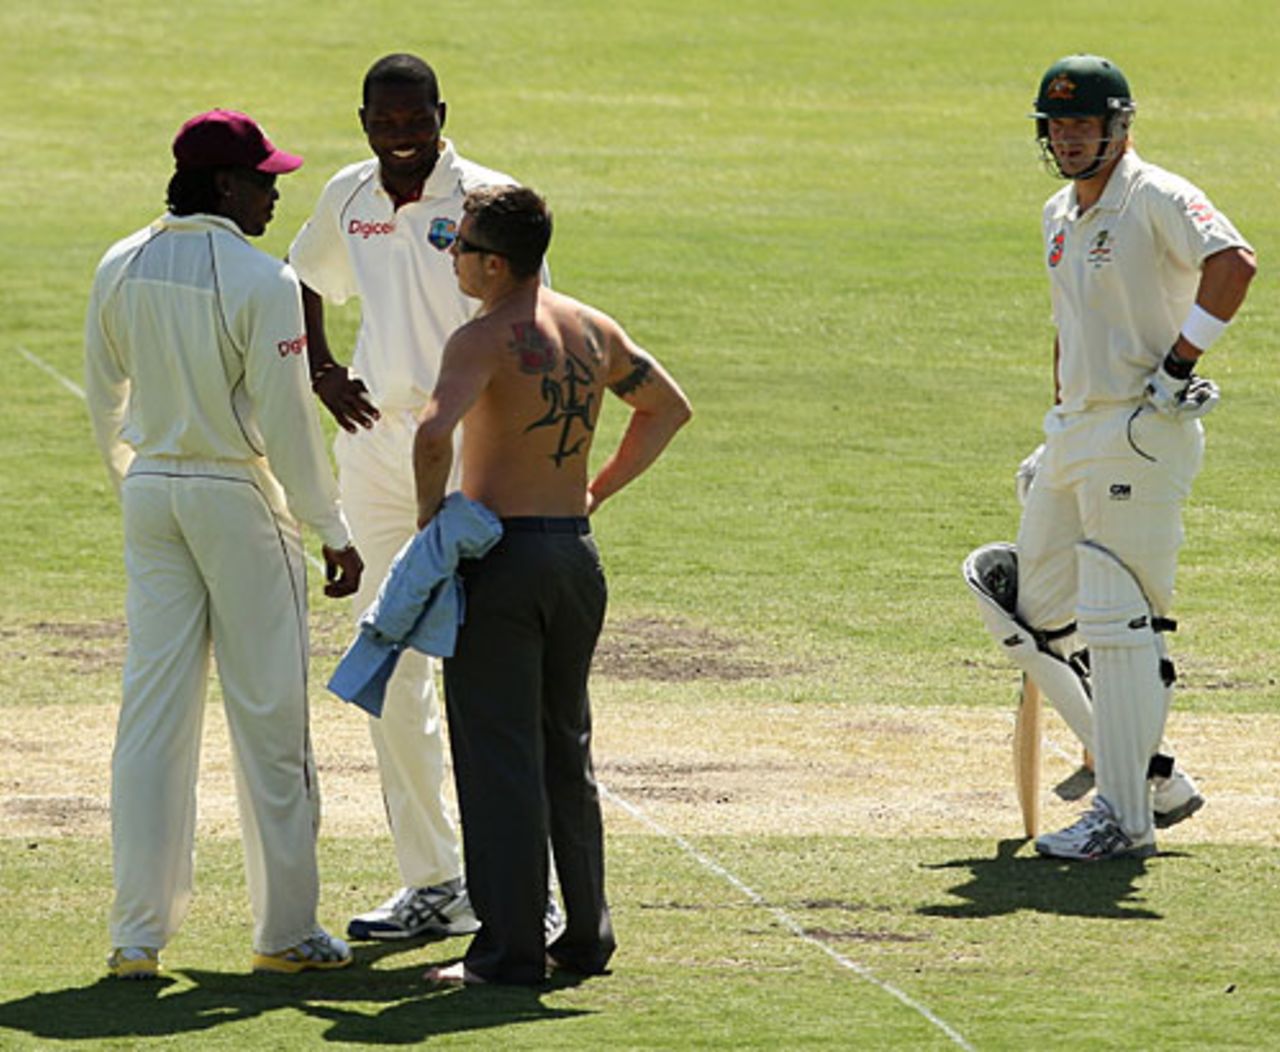 Chris Gayle and Sulieman Benn chat with a pitch invader, Australia v West Indies, 2nd Test, Adelaide